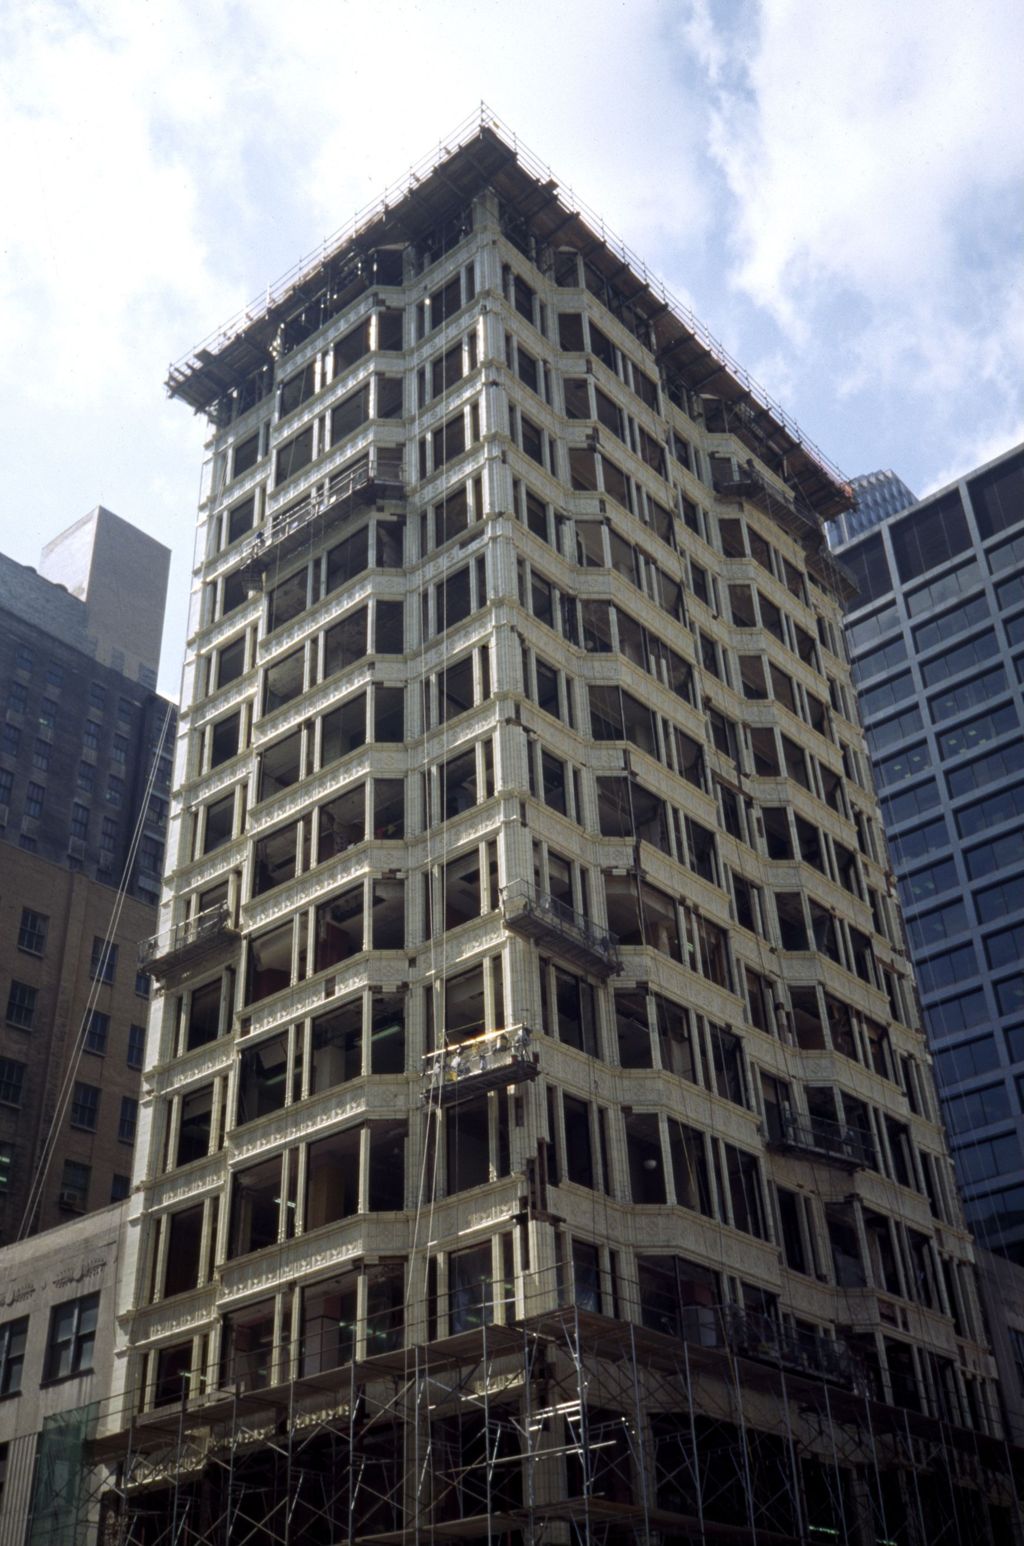 Miniature of Reliance Building, State Street at W. Washington